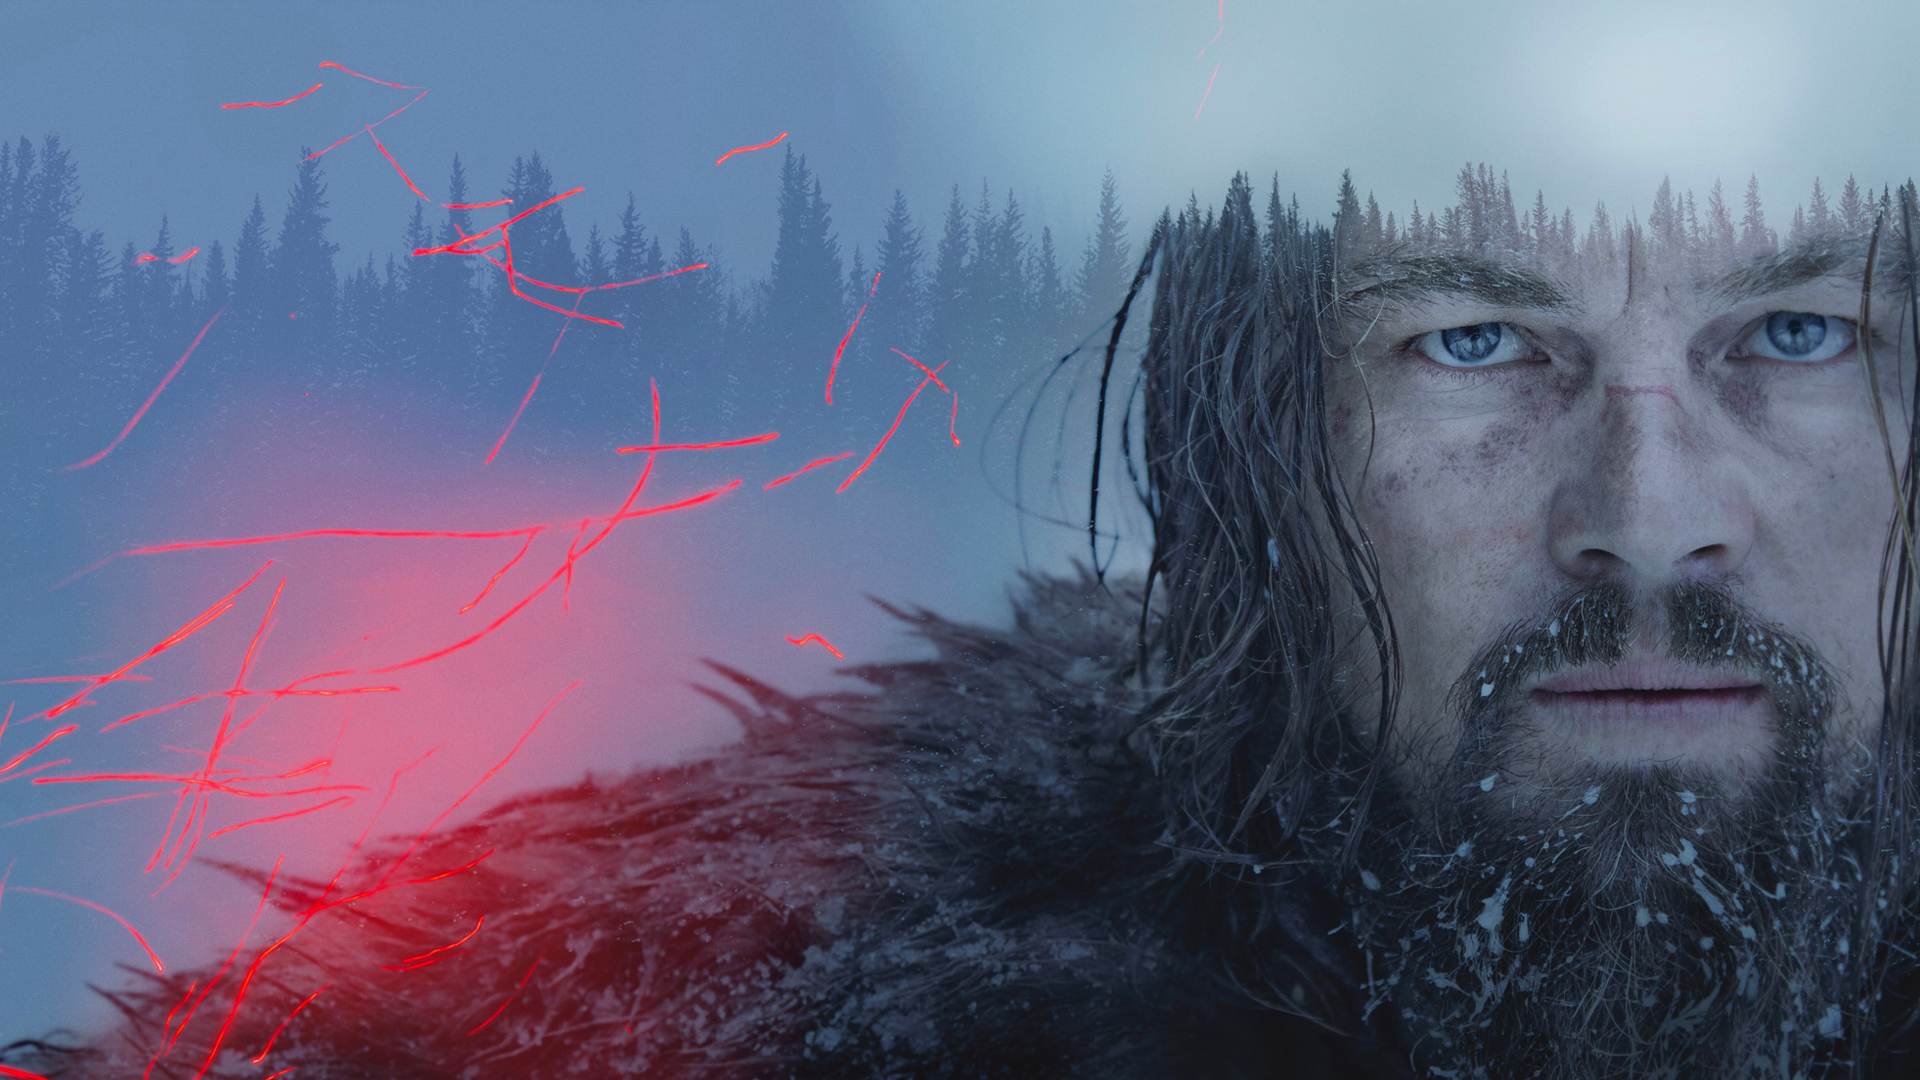 40+ The Revenant HD Wallpapers and Backgrounds